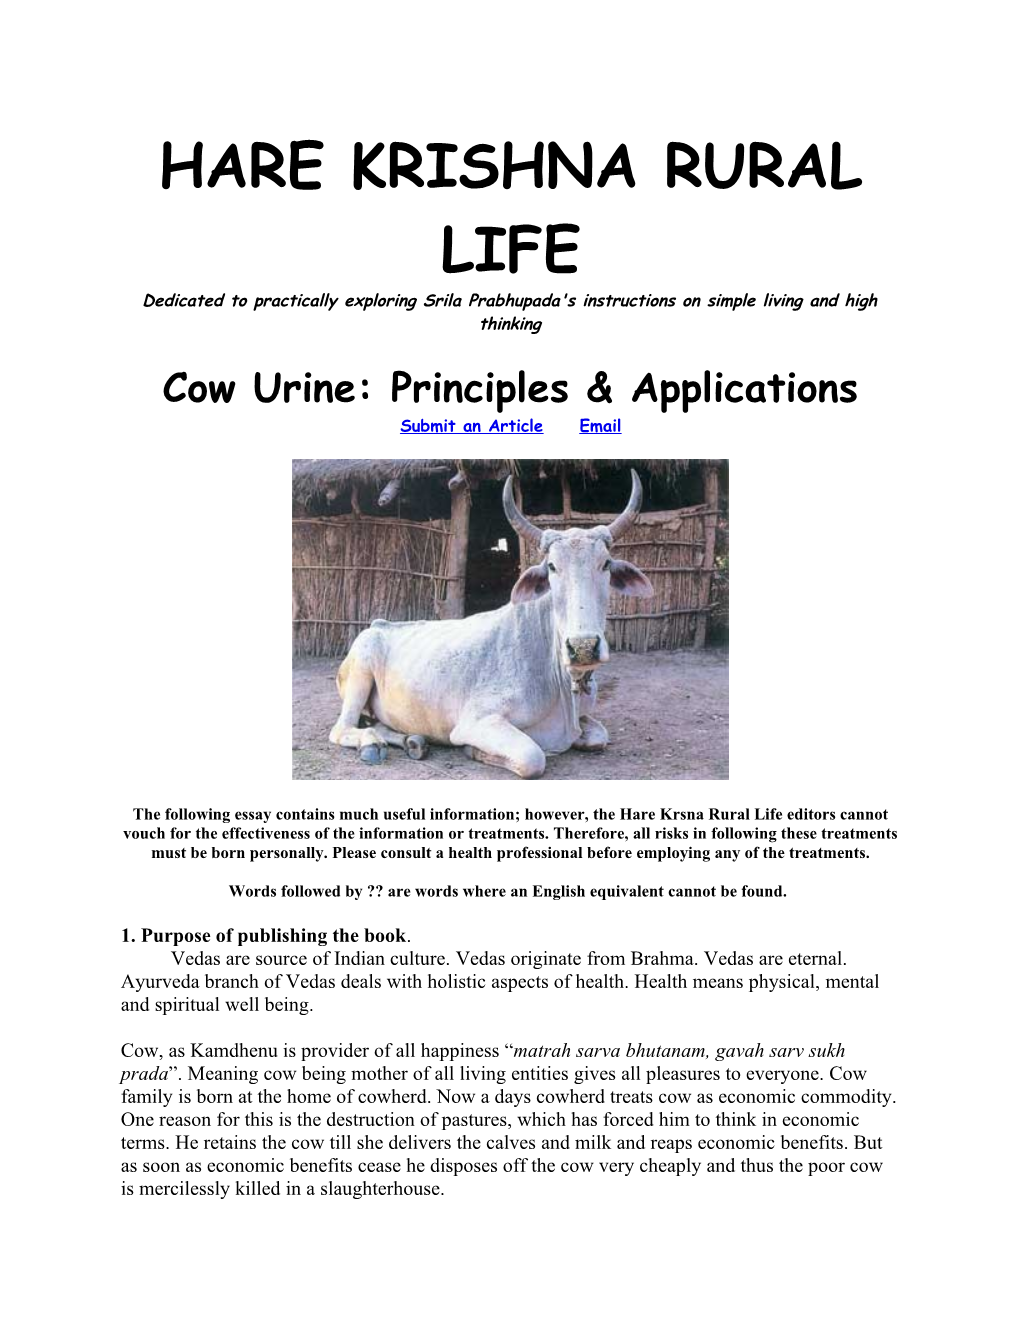 HARE KRISHNA RURAL LIFE Dedicated to Practically Exploring Srila Prabhupada's Instructions on Simple Living and High Thinking